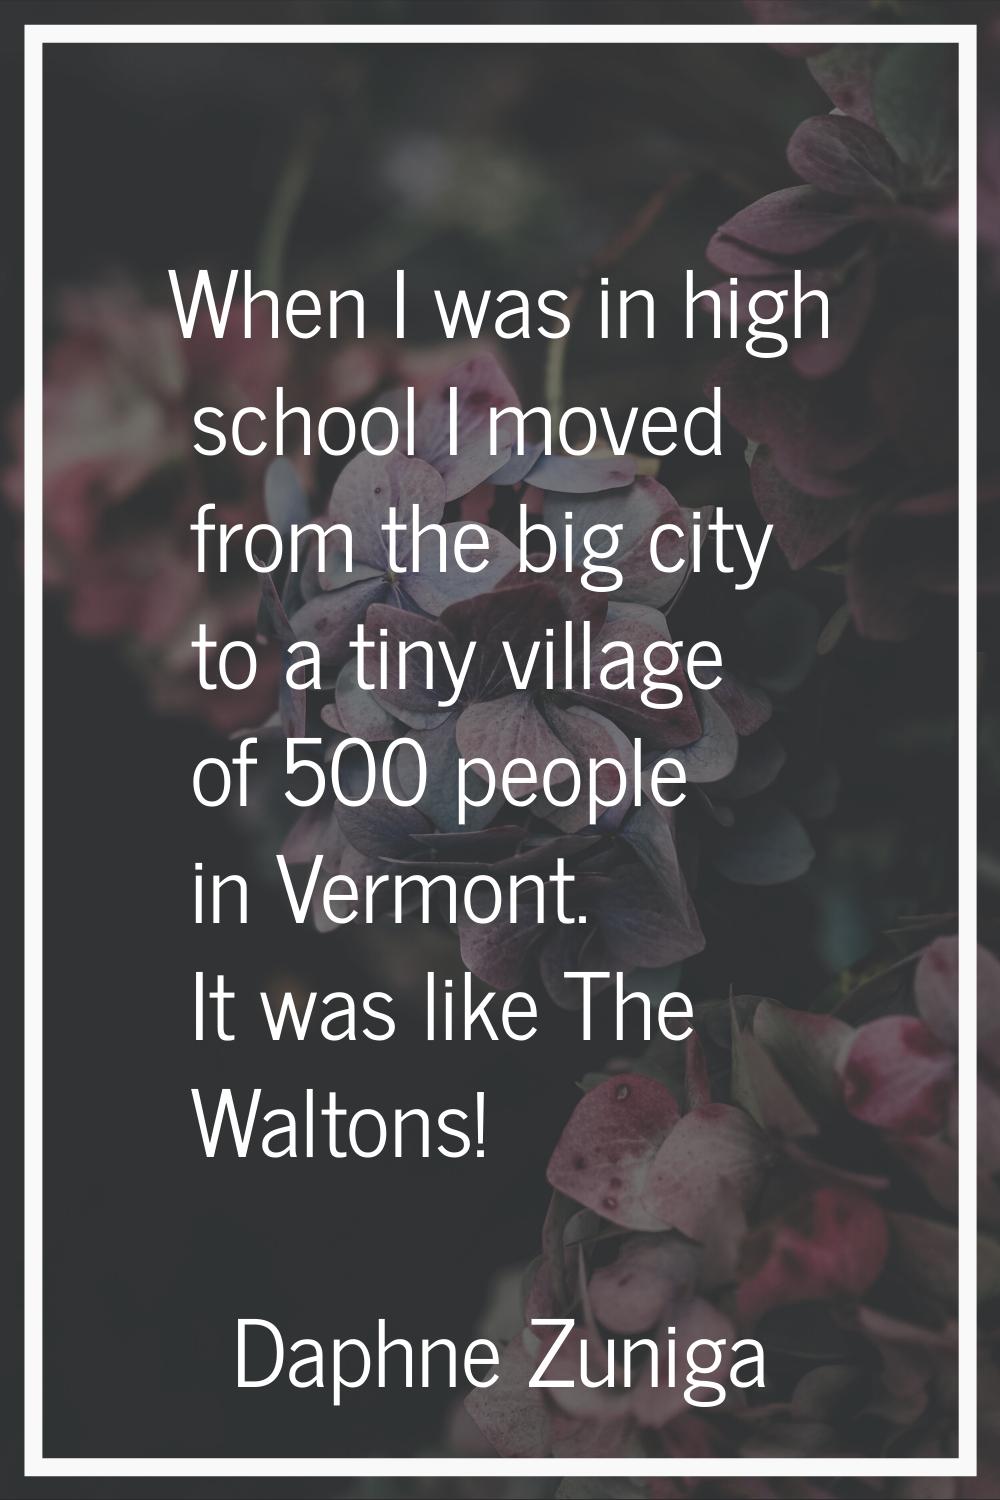 When I was in high school I moved from the big city to a tiny village of 500 people in Vermont. It 